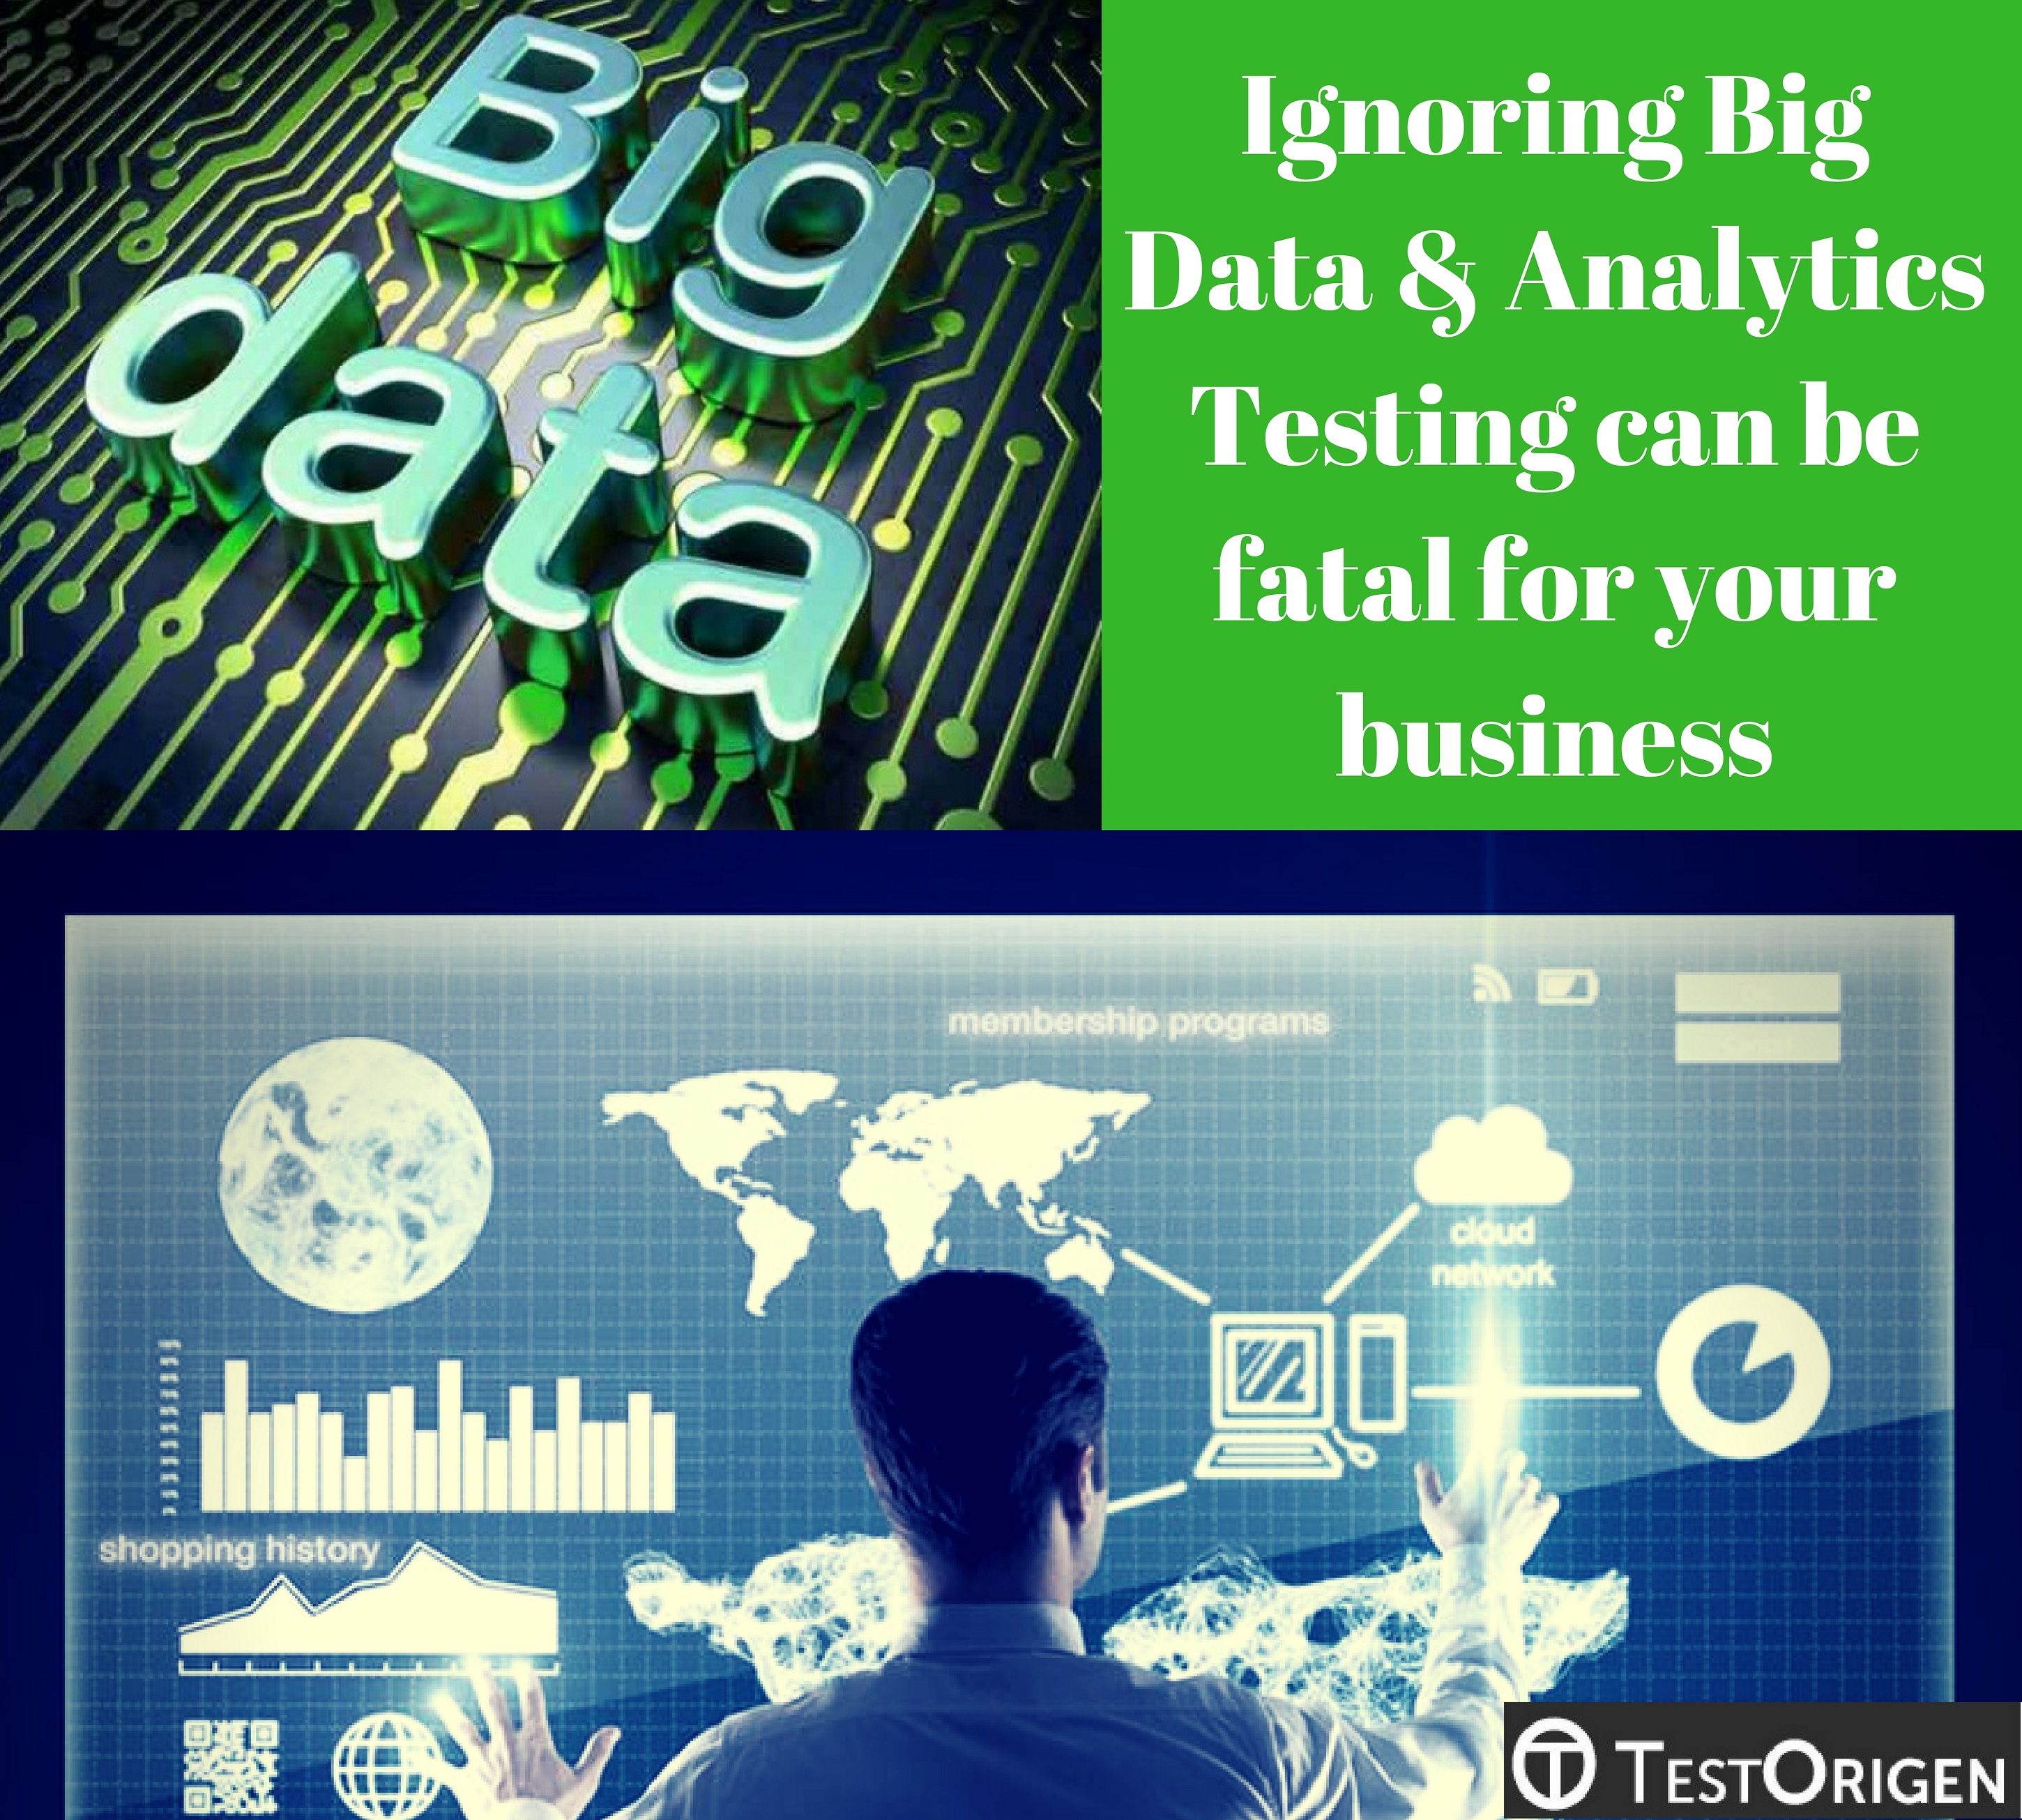 Ignoring Big Data & Analytics Testing can be fatal for your business